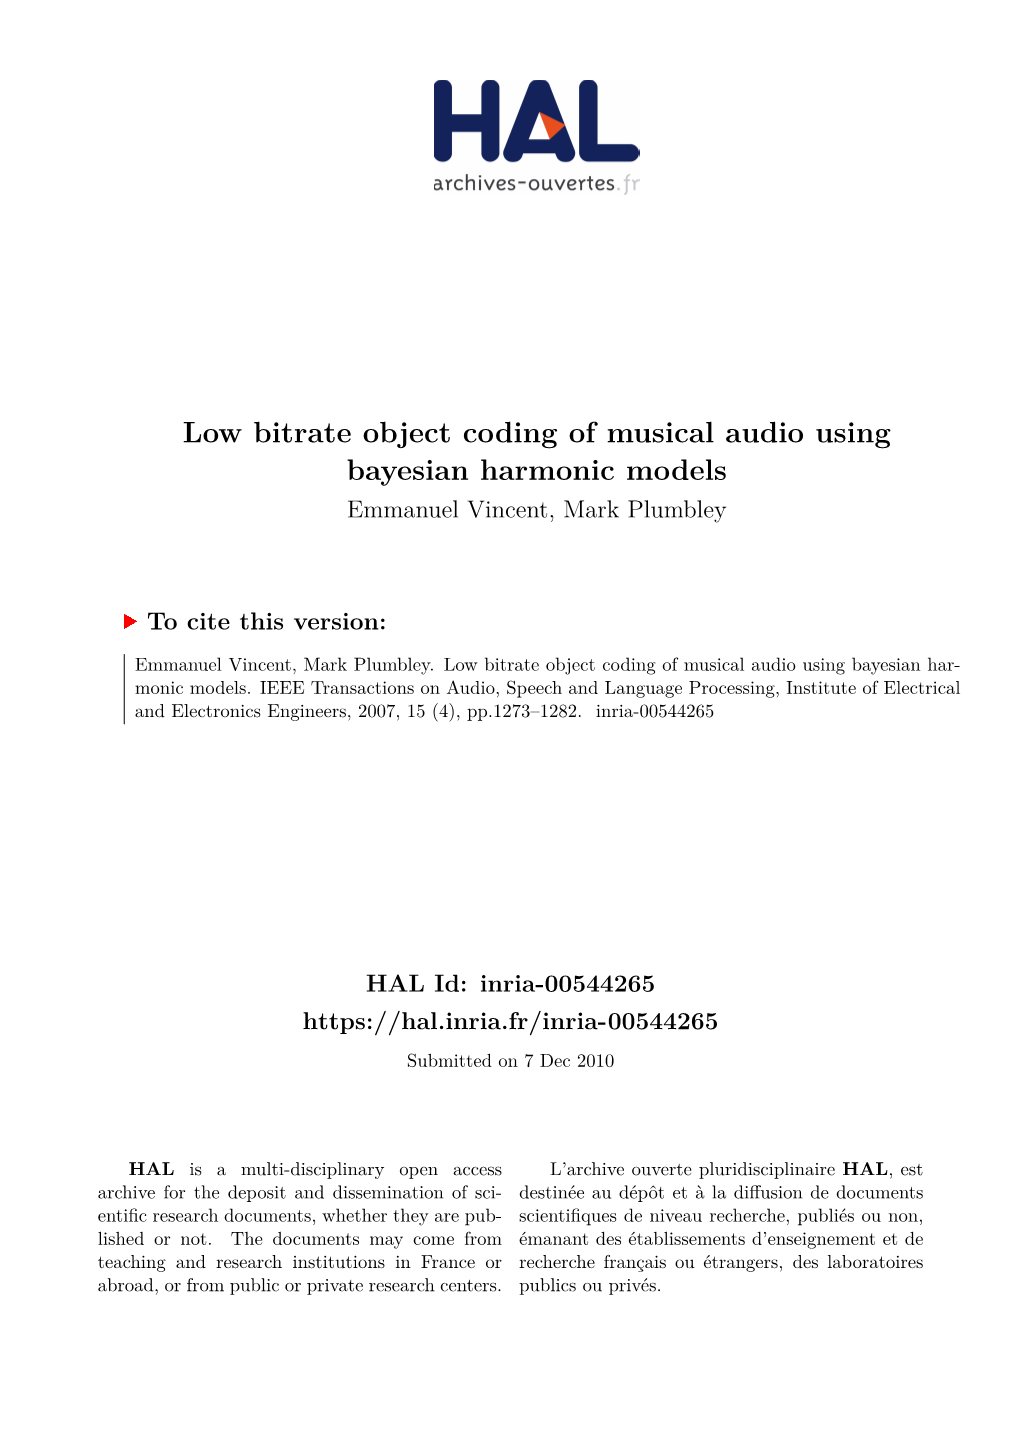 Low Bitrate Object Coding of Musical Audio Using Bayesian Harmonic Models Emmanuel Vincent, Mark Plumbley